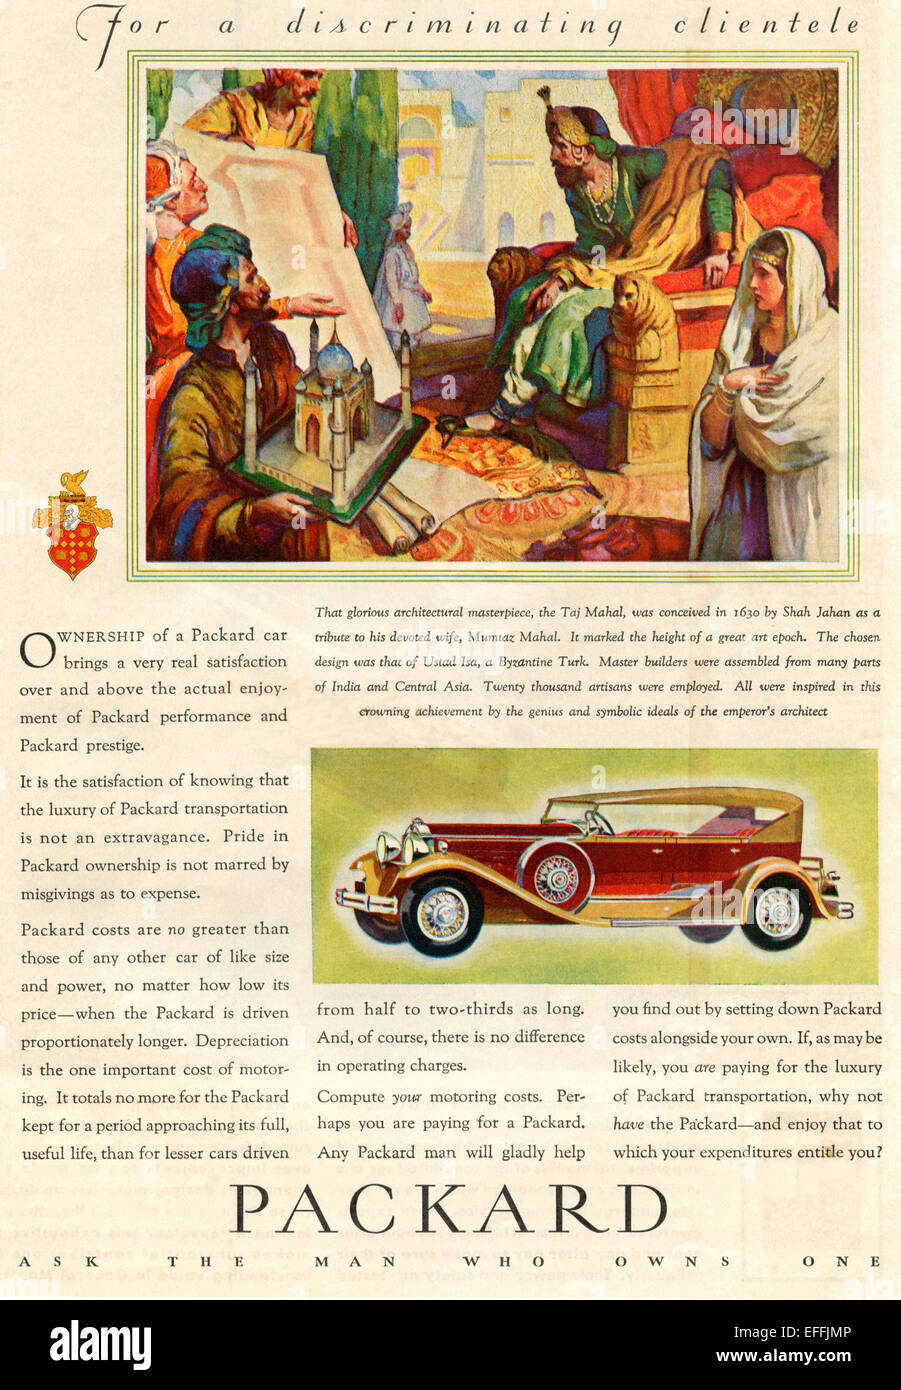 1930's American advertisement for a Packard Automobile. Stock Photo